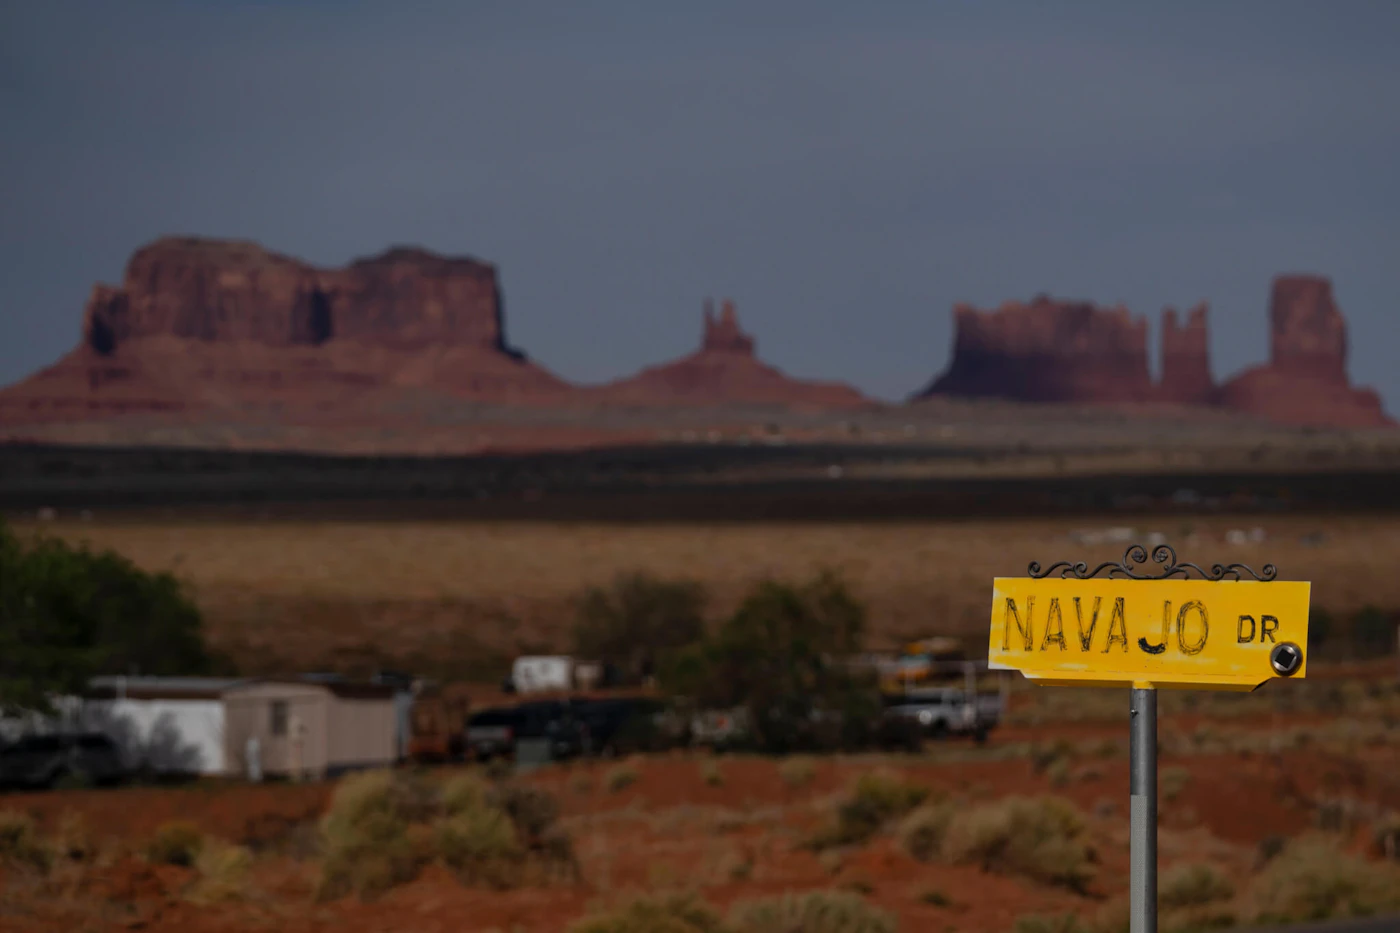 FILE - A sign marks Navajo Drive, as Sentinel Mesa, homes and other structures in Oljato-Monument Valley, Utah, on the Navajo Reservation, stand in the distance, on April 30, 2020.  The Supreme Court has ruled against the Navajo Nation in a dispute involving water from the drought-stricken Colorado River. States that draw water from the river — Arizona, Nevada and Colorado — and water districts in California had urged the court to decide for them, and that's what the justices did in a 5-4 ruling. (AP Photo/Carolyn Kaster, File)